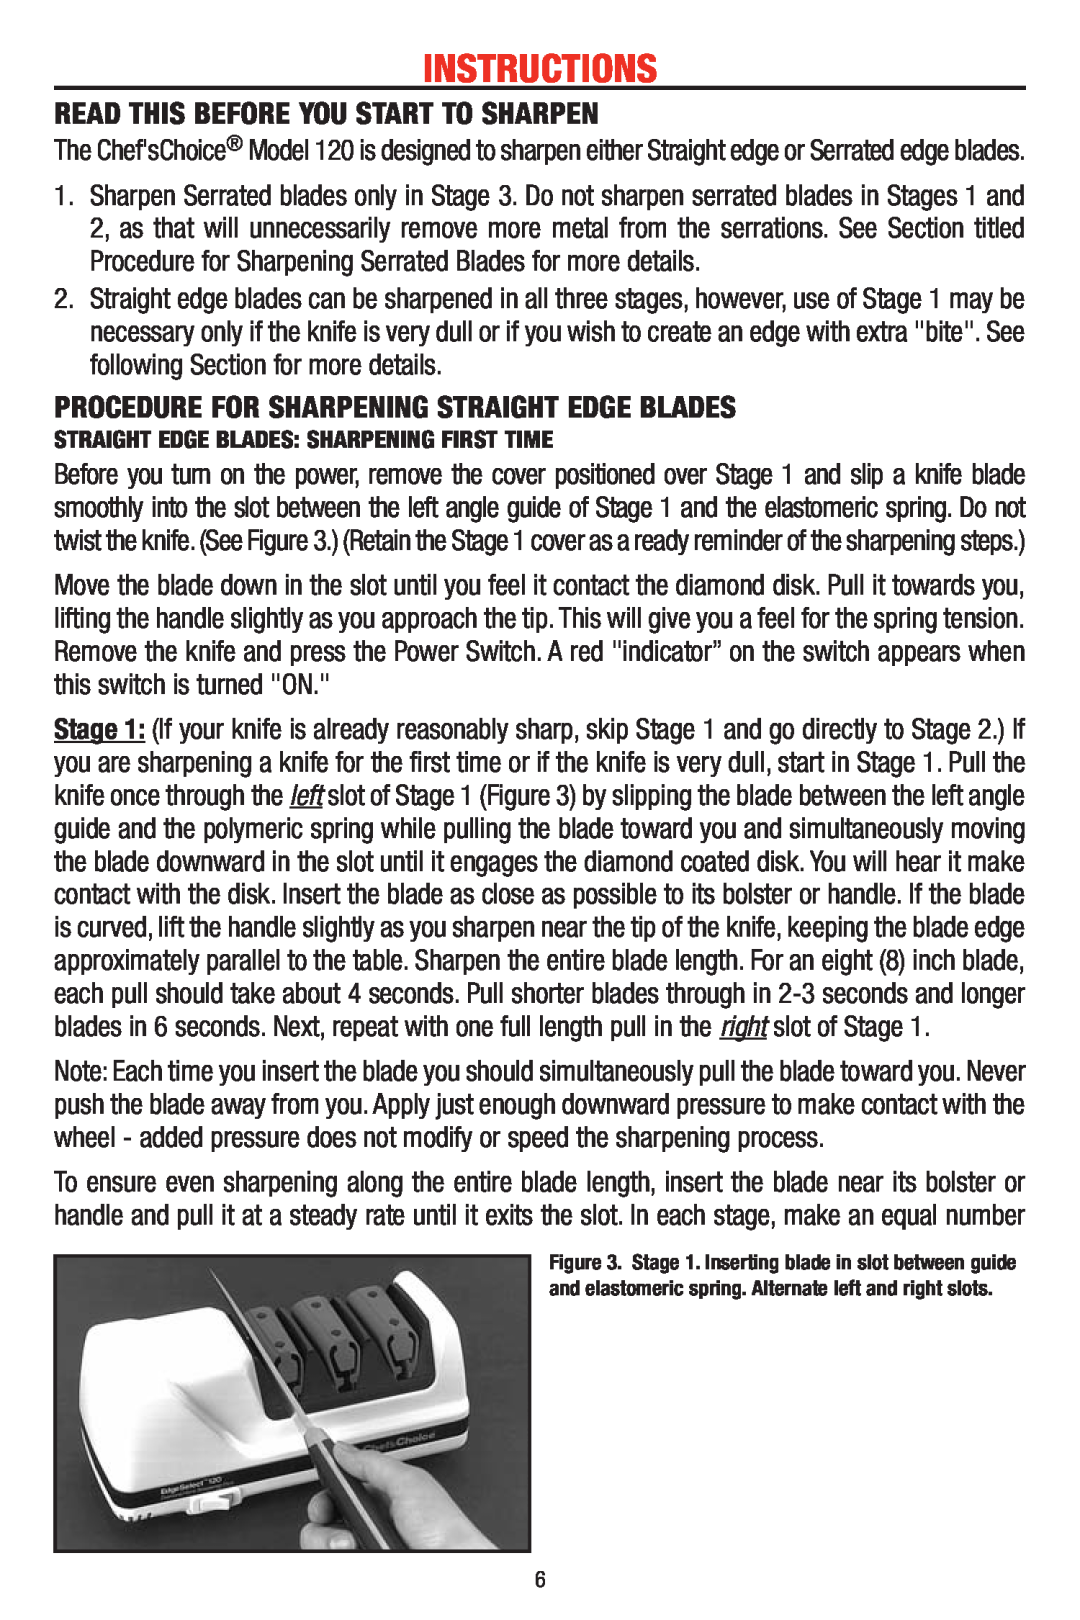 Edge Craft 120 manual Instructions, Read This Before You Start To Sharpen, Procedure For Sharpening Straight Edge Blades 